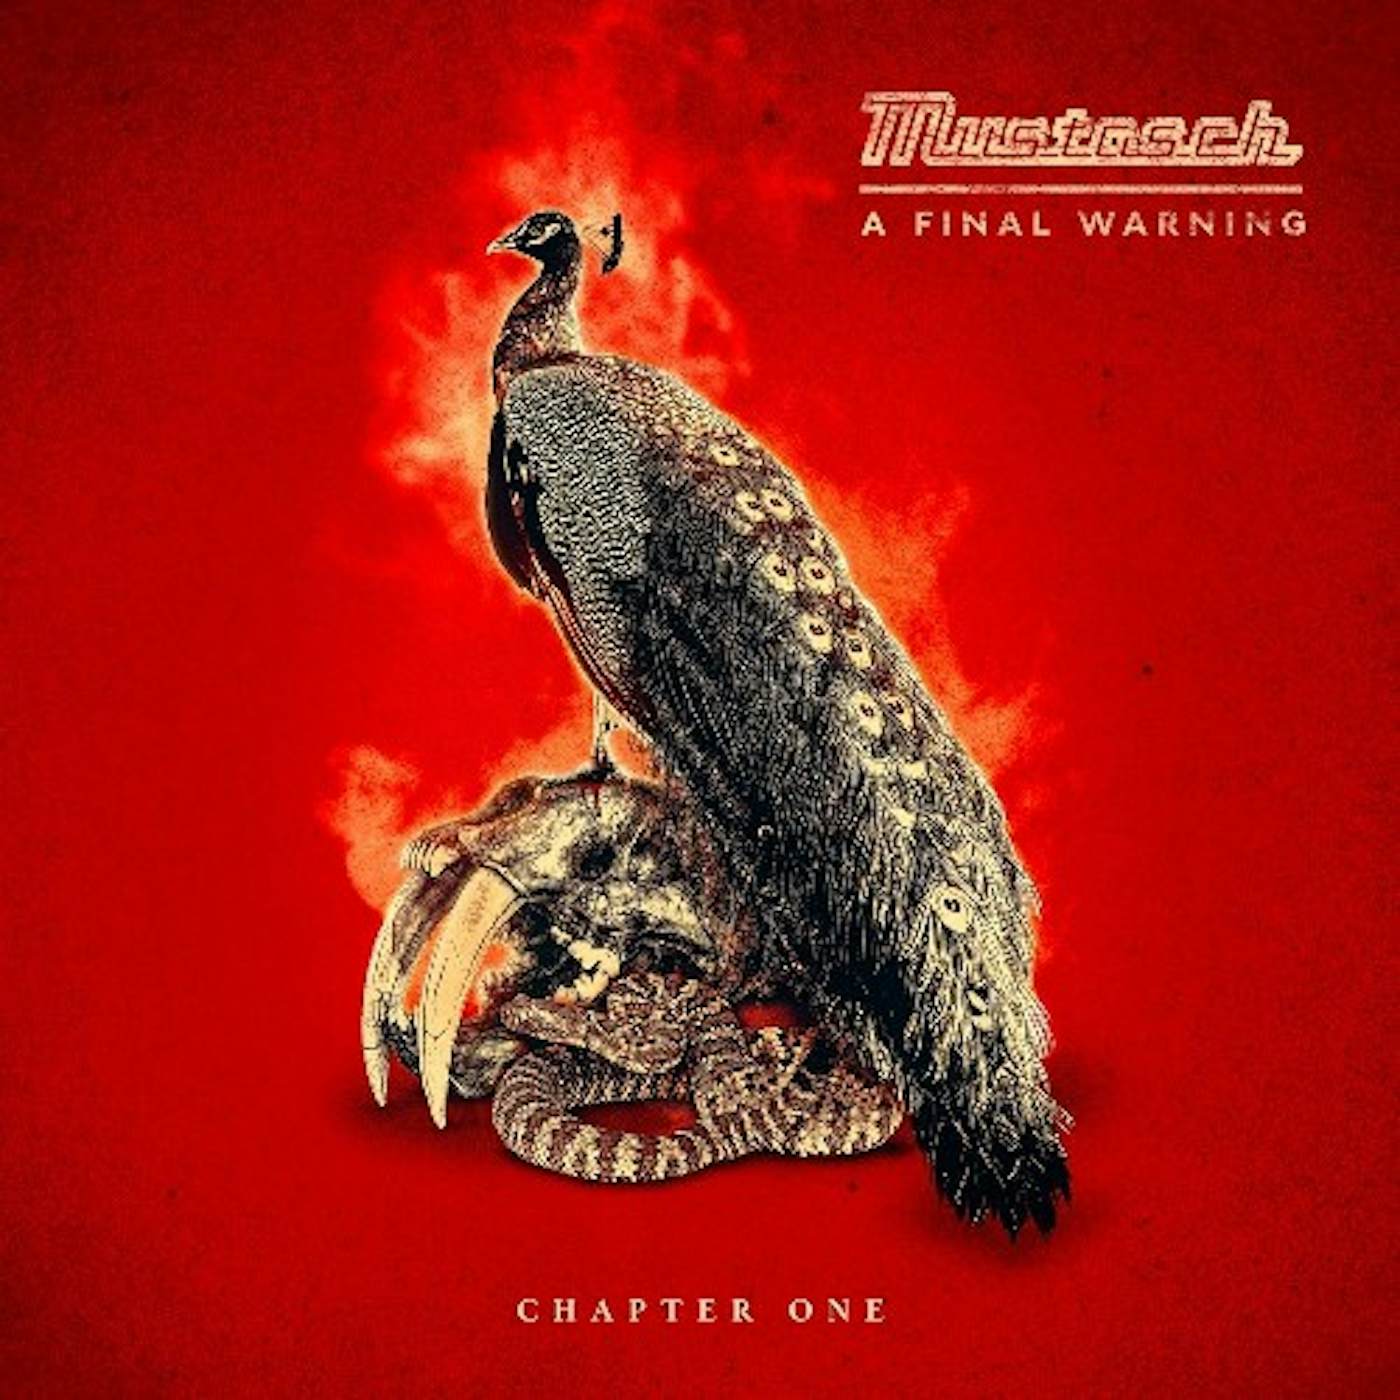 Mustasch FINAL WARNING - CHAPTER ONE Vinyl Record